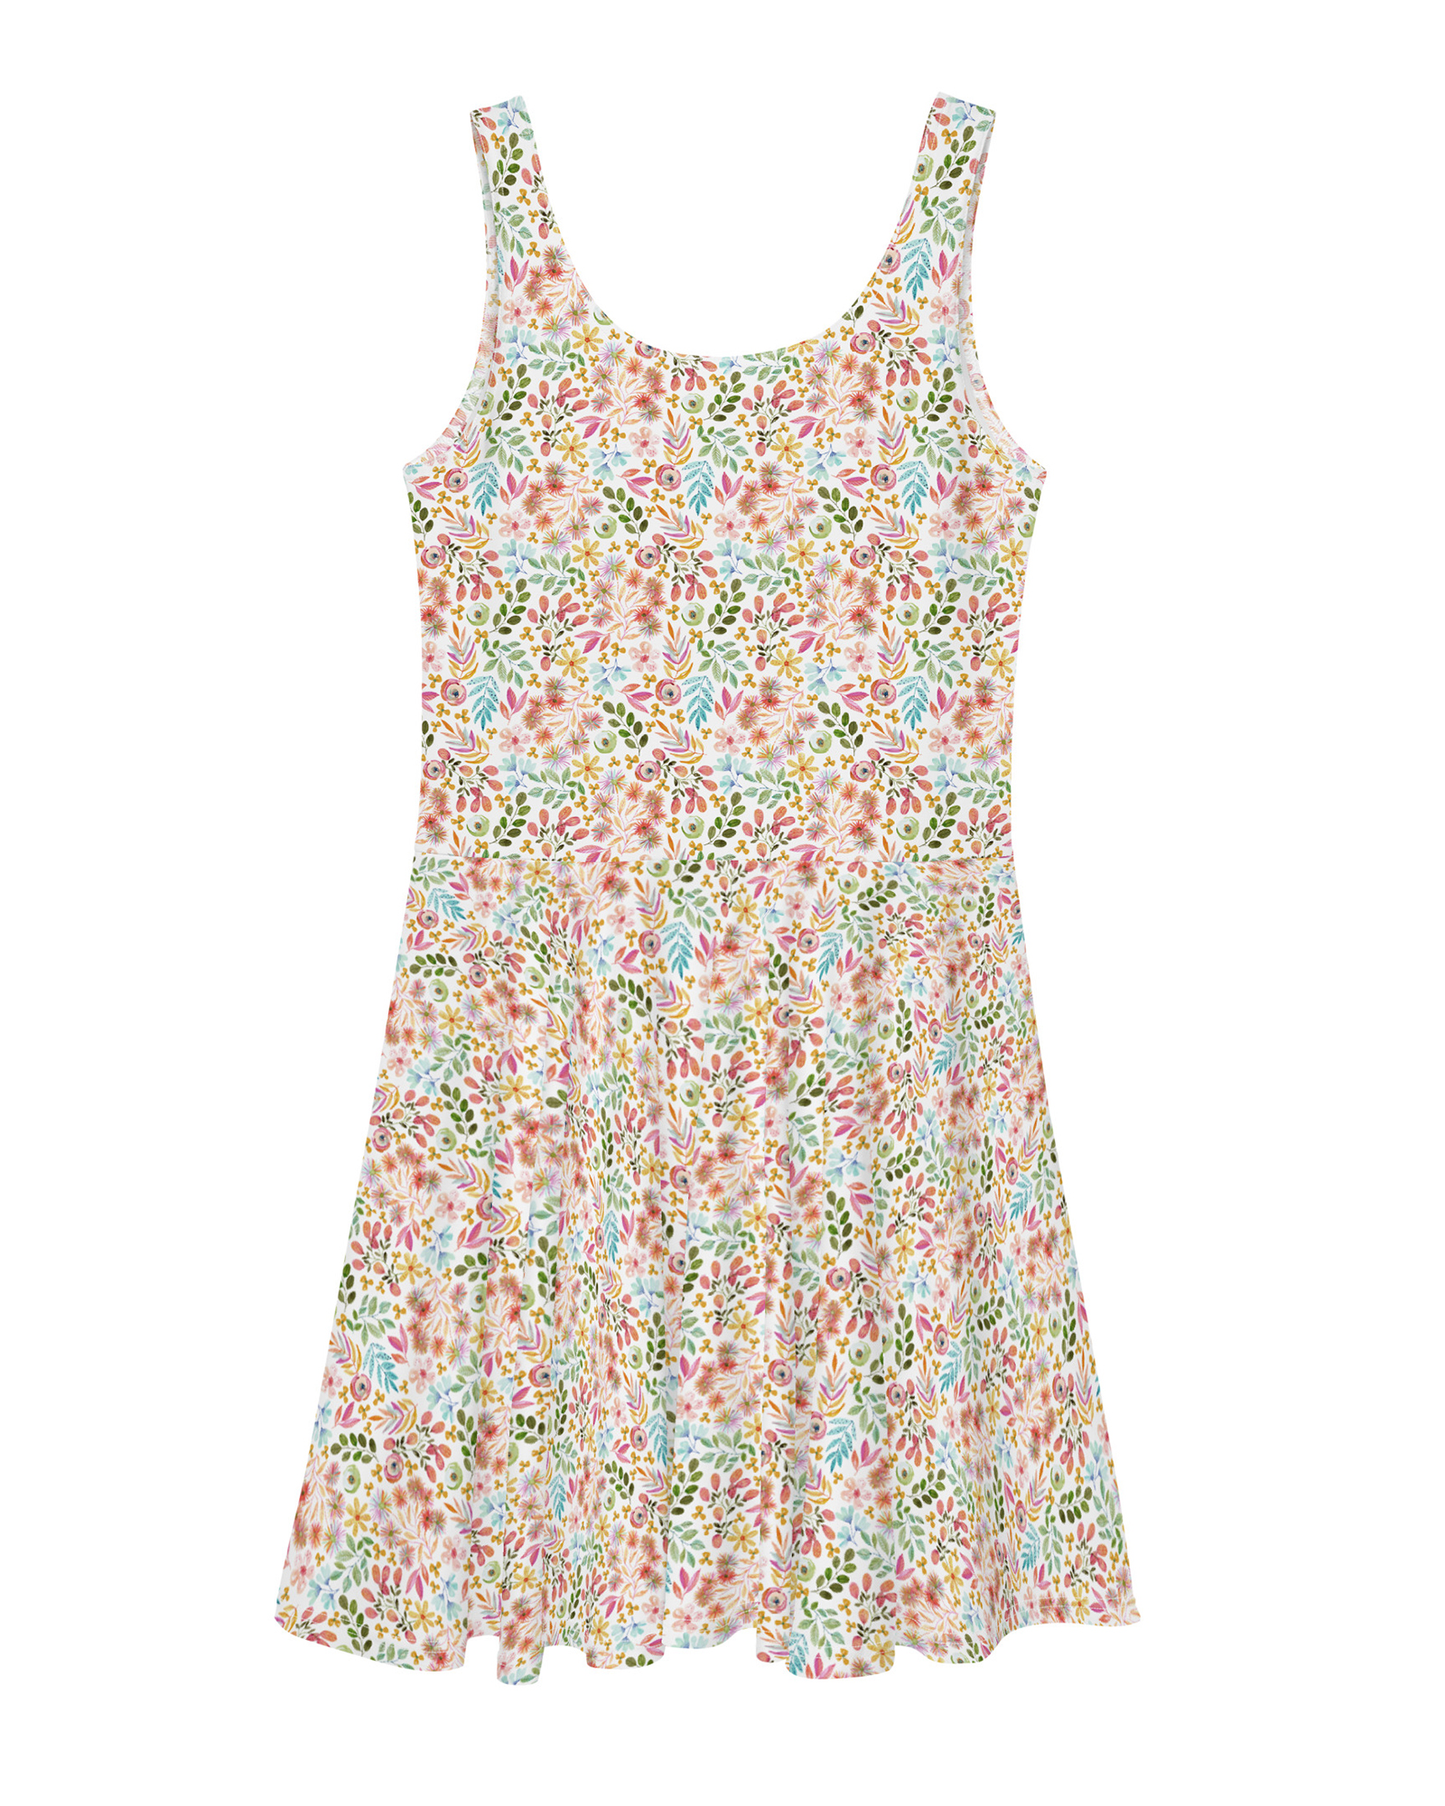 Garden Gala small pastel floral printed sleeveless dress with a scoopneck, back view pictured flat on white background